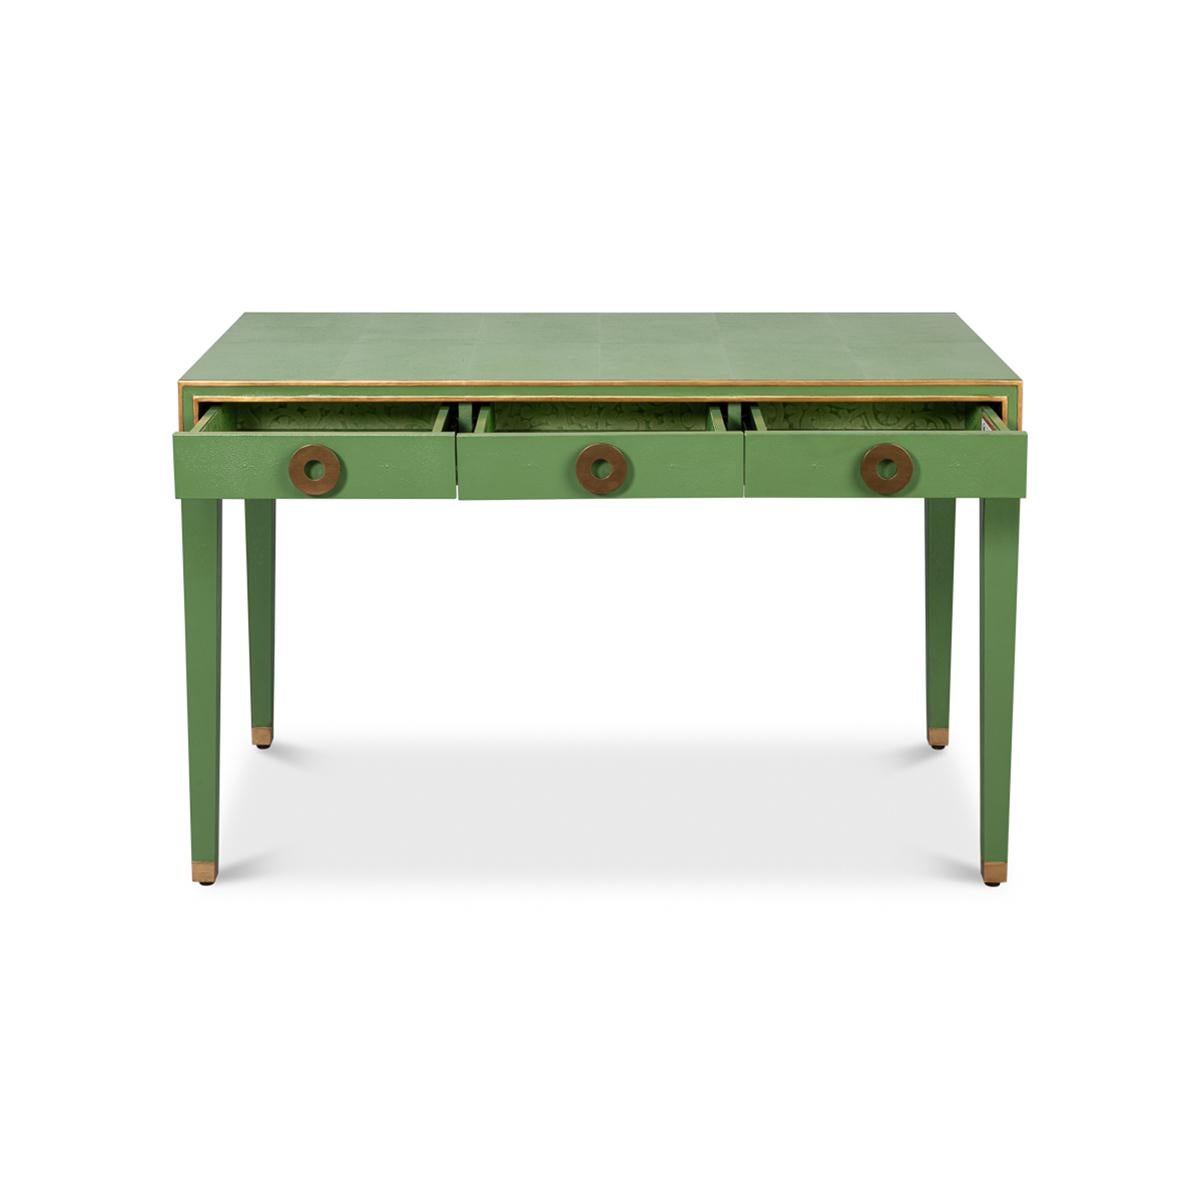 Asian Art Deco Leather Desk In Watercress Green For Sale